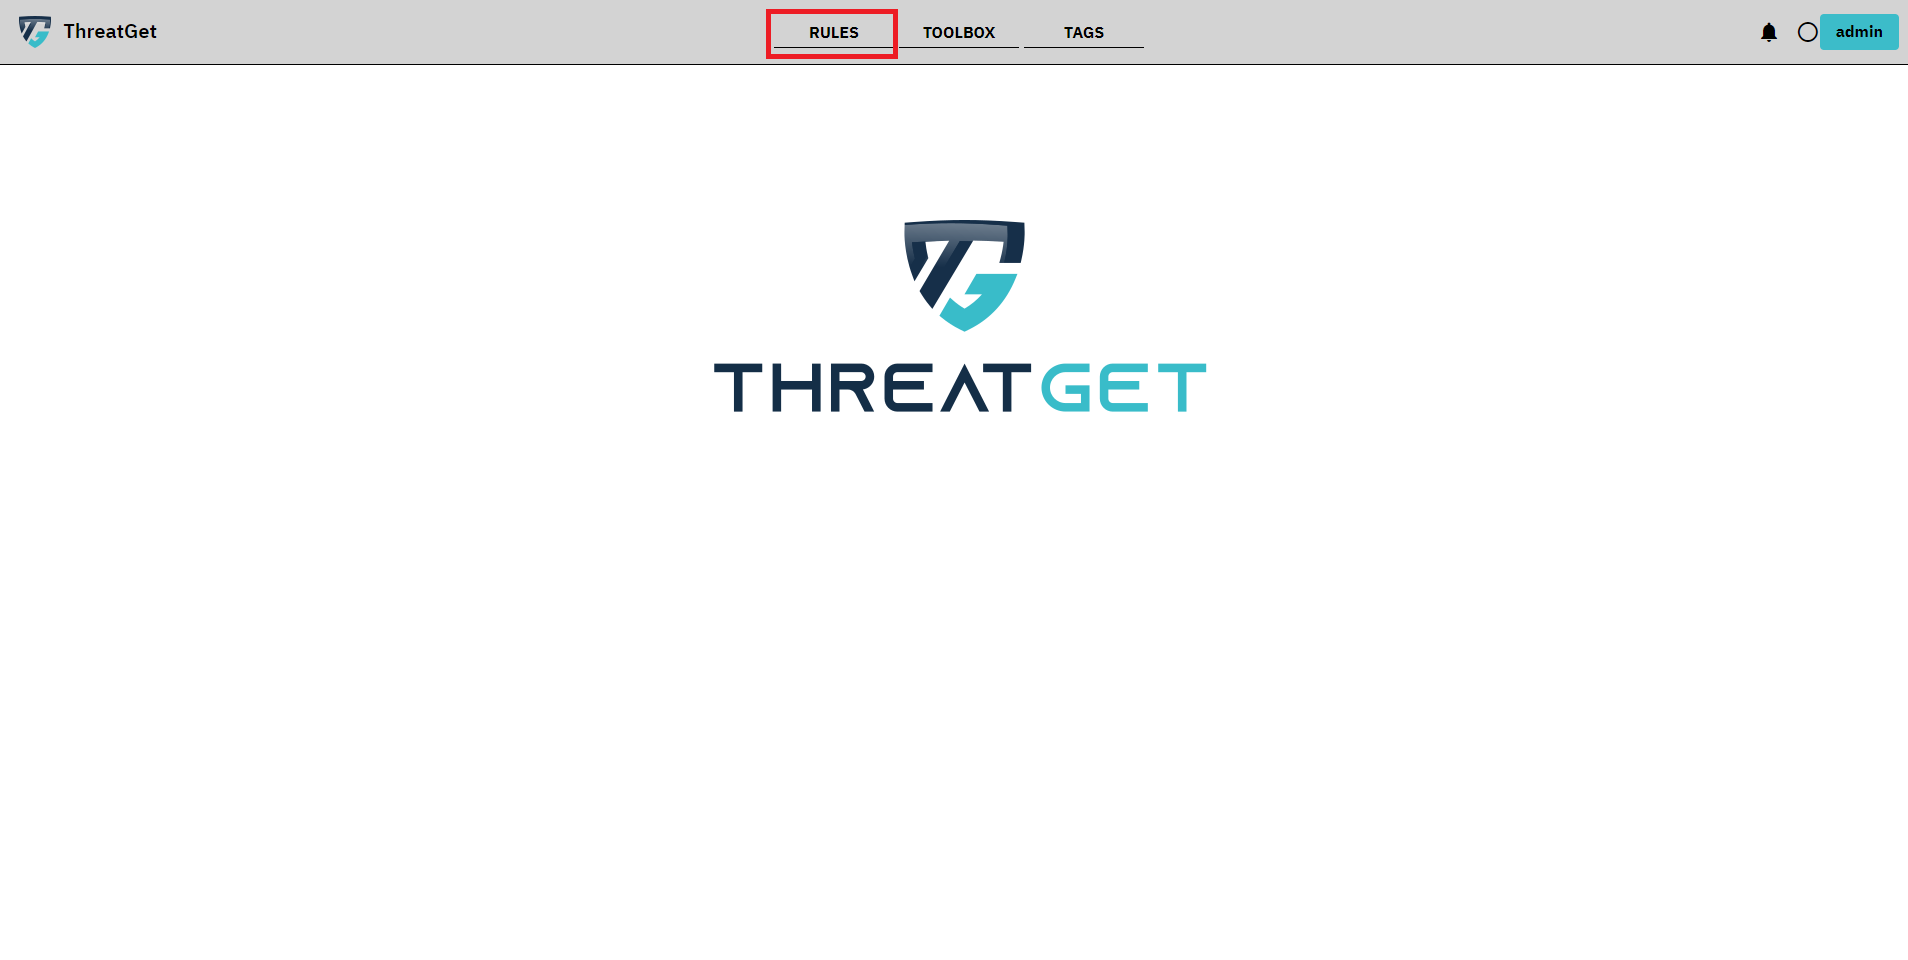 THREATGET overview screen rules button marked